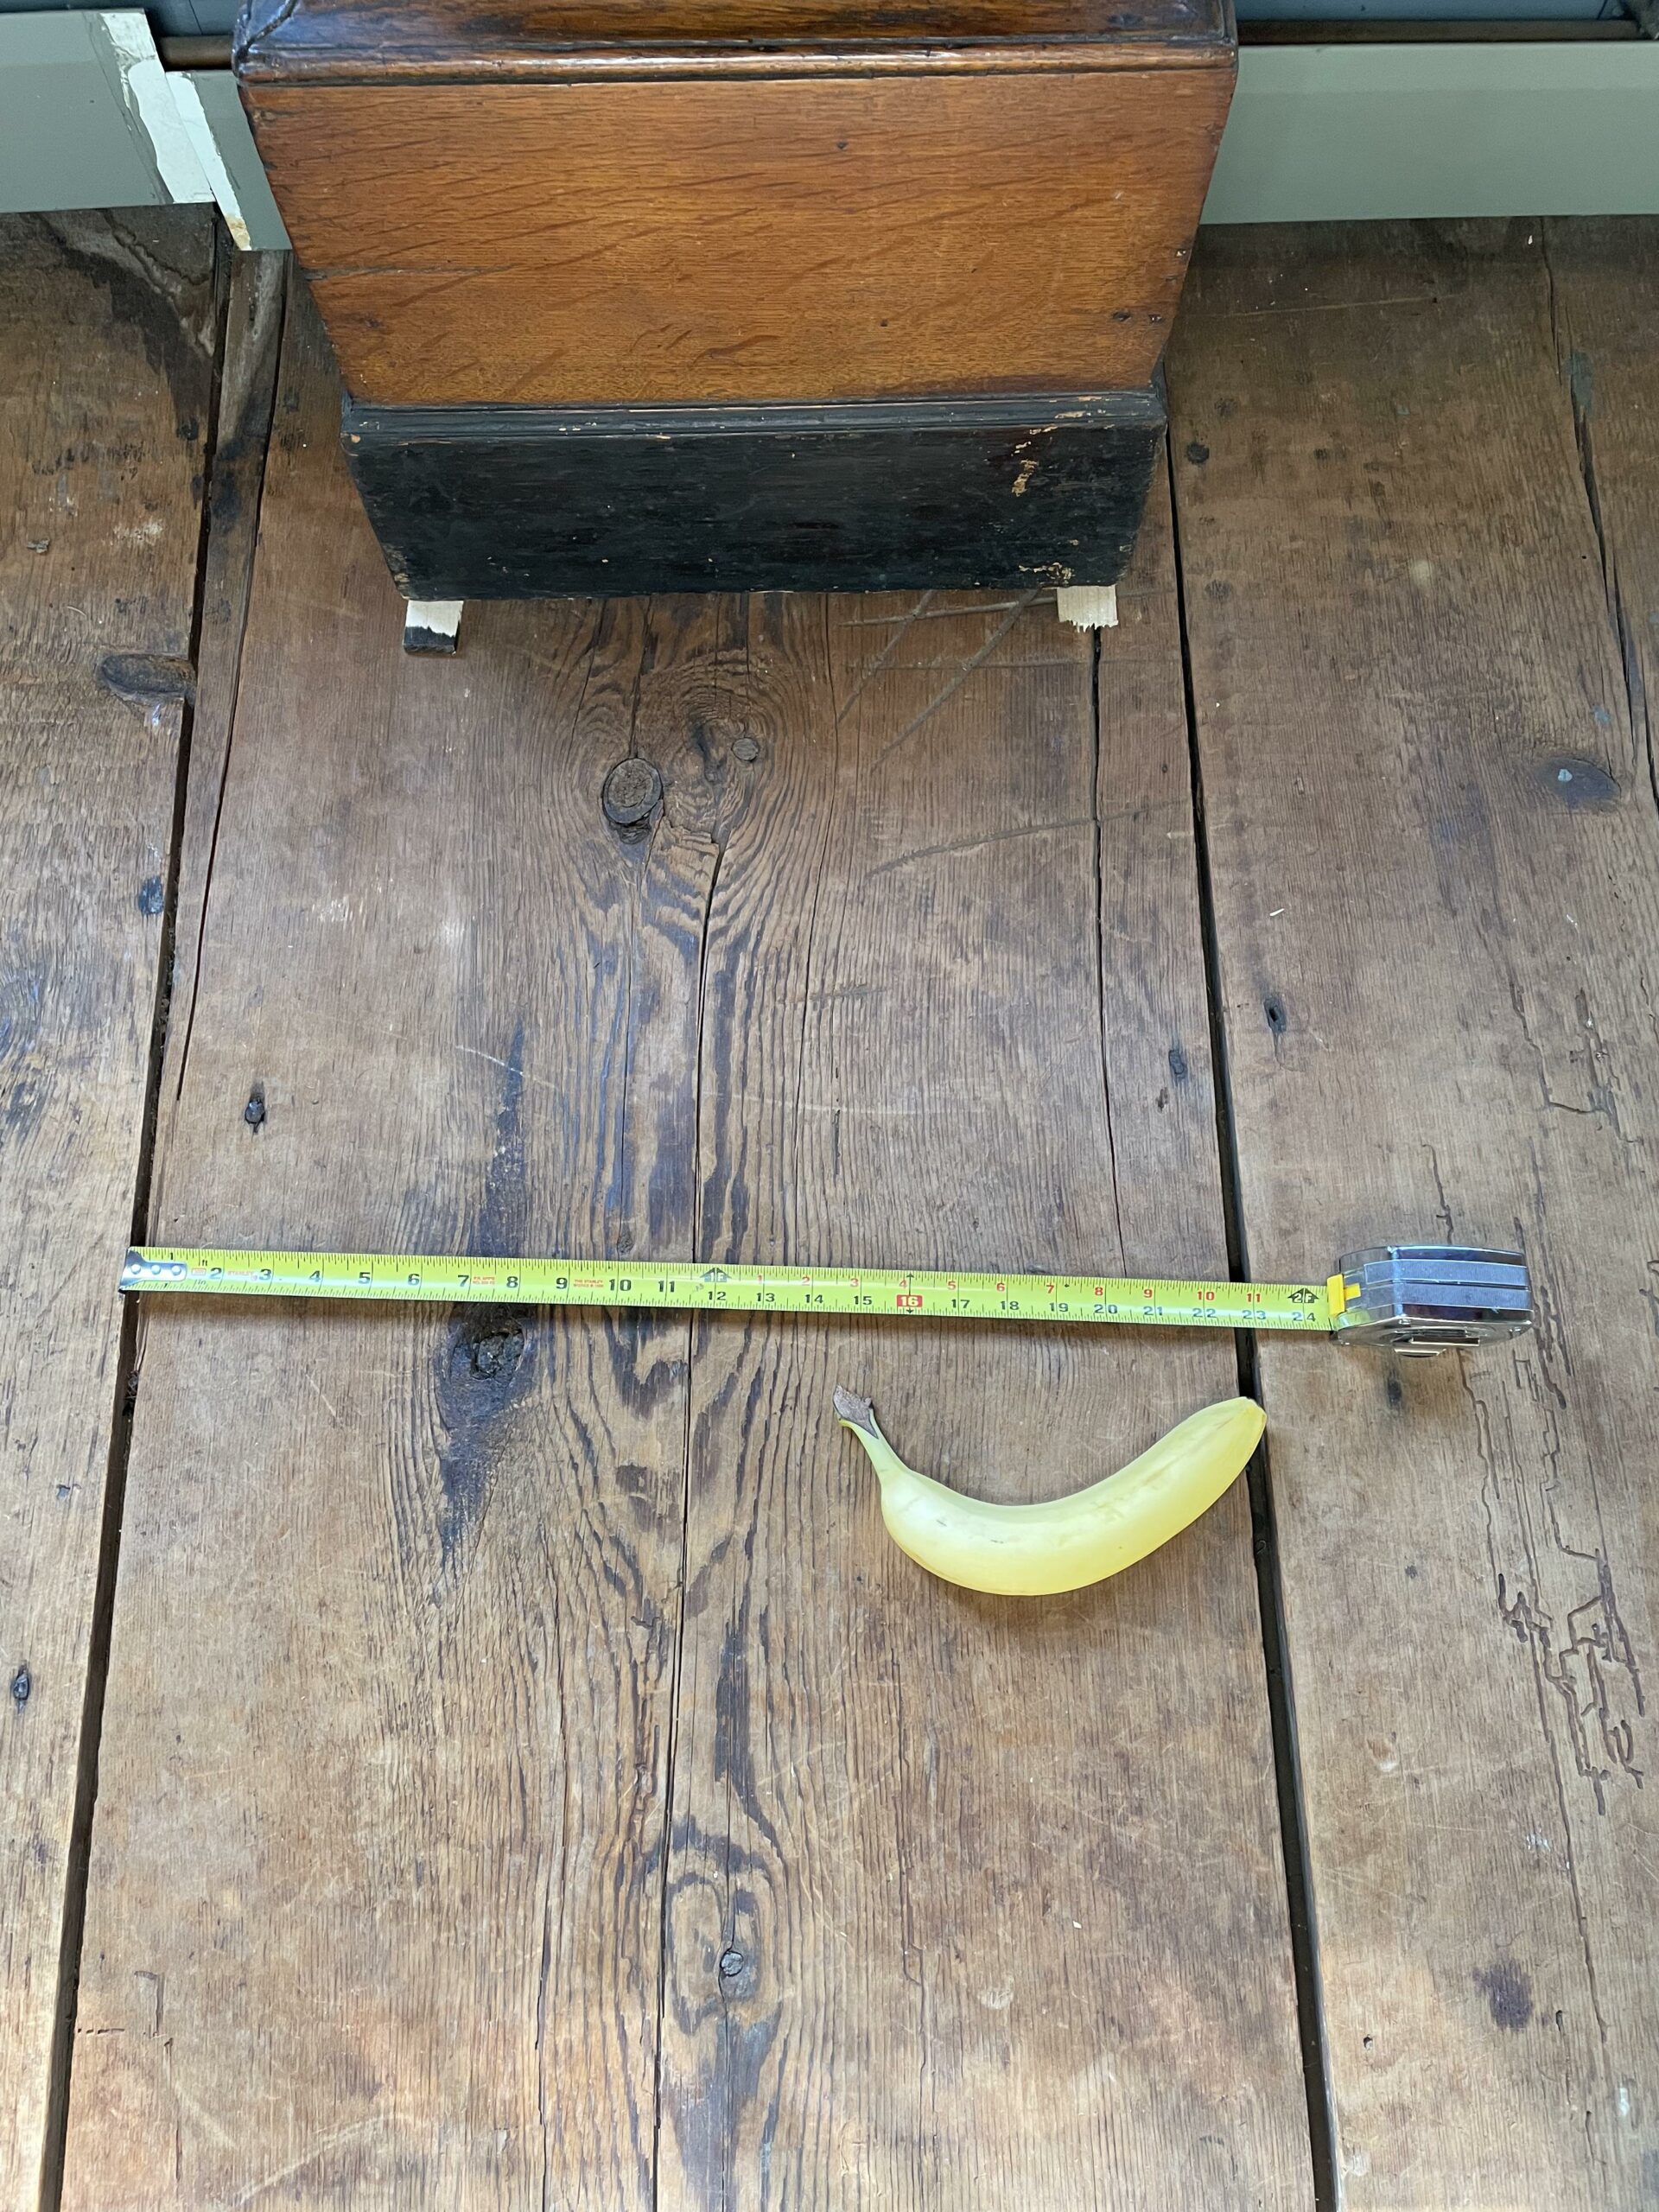 floorboards from the 1700s measured with a measuring tape and a banana